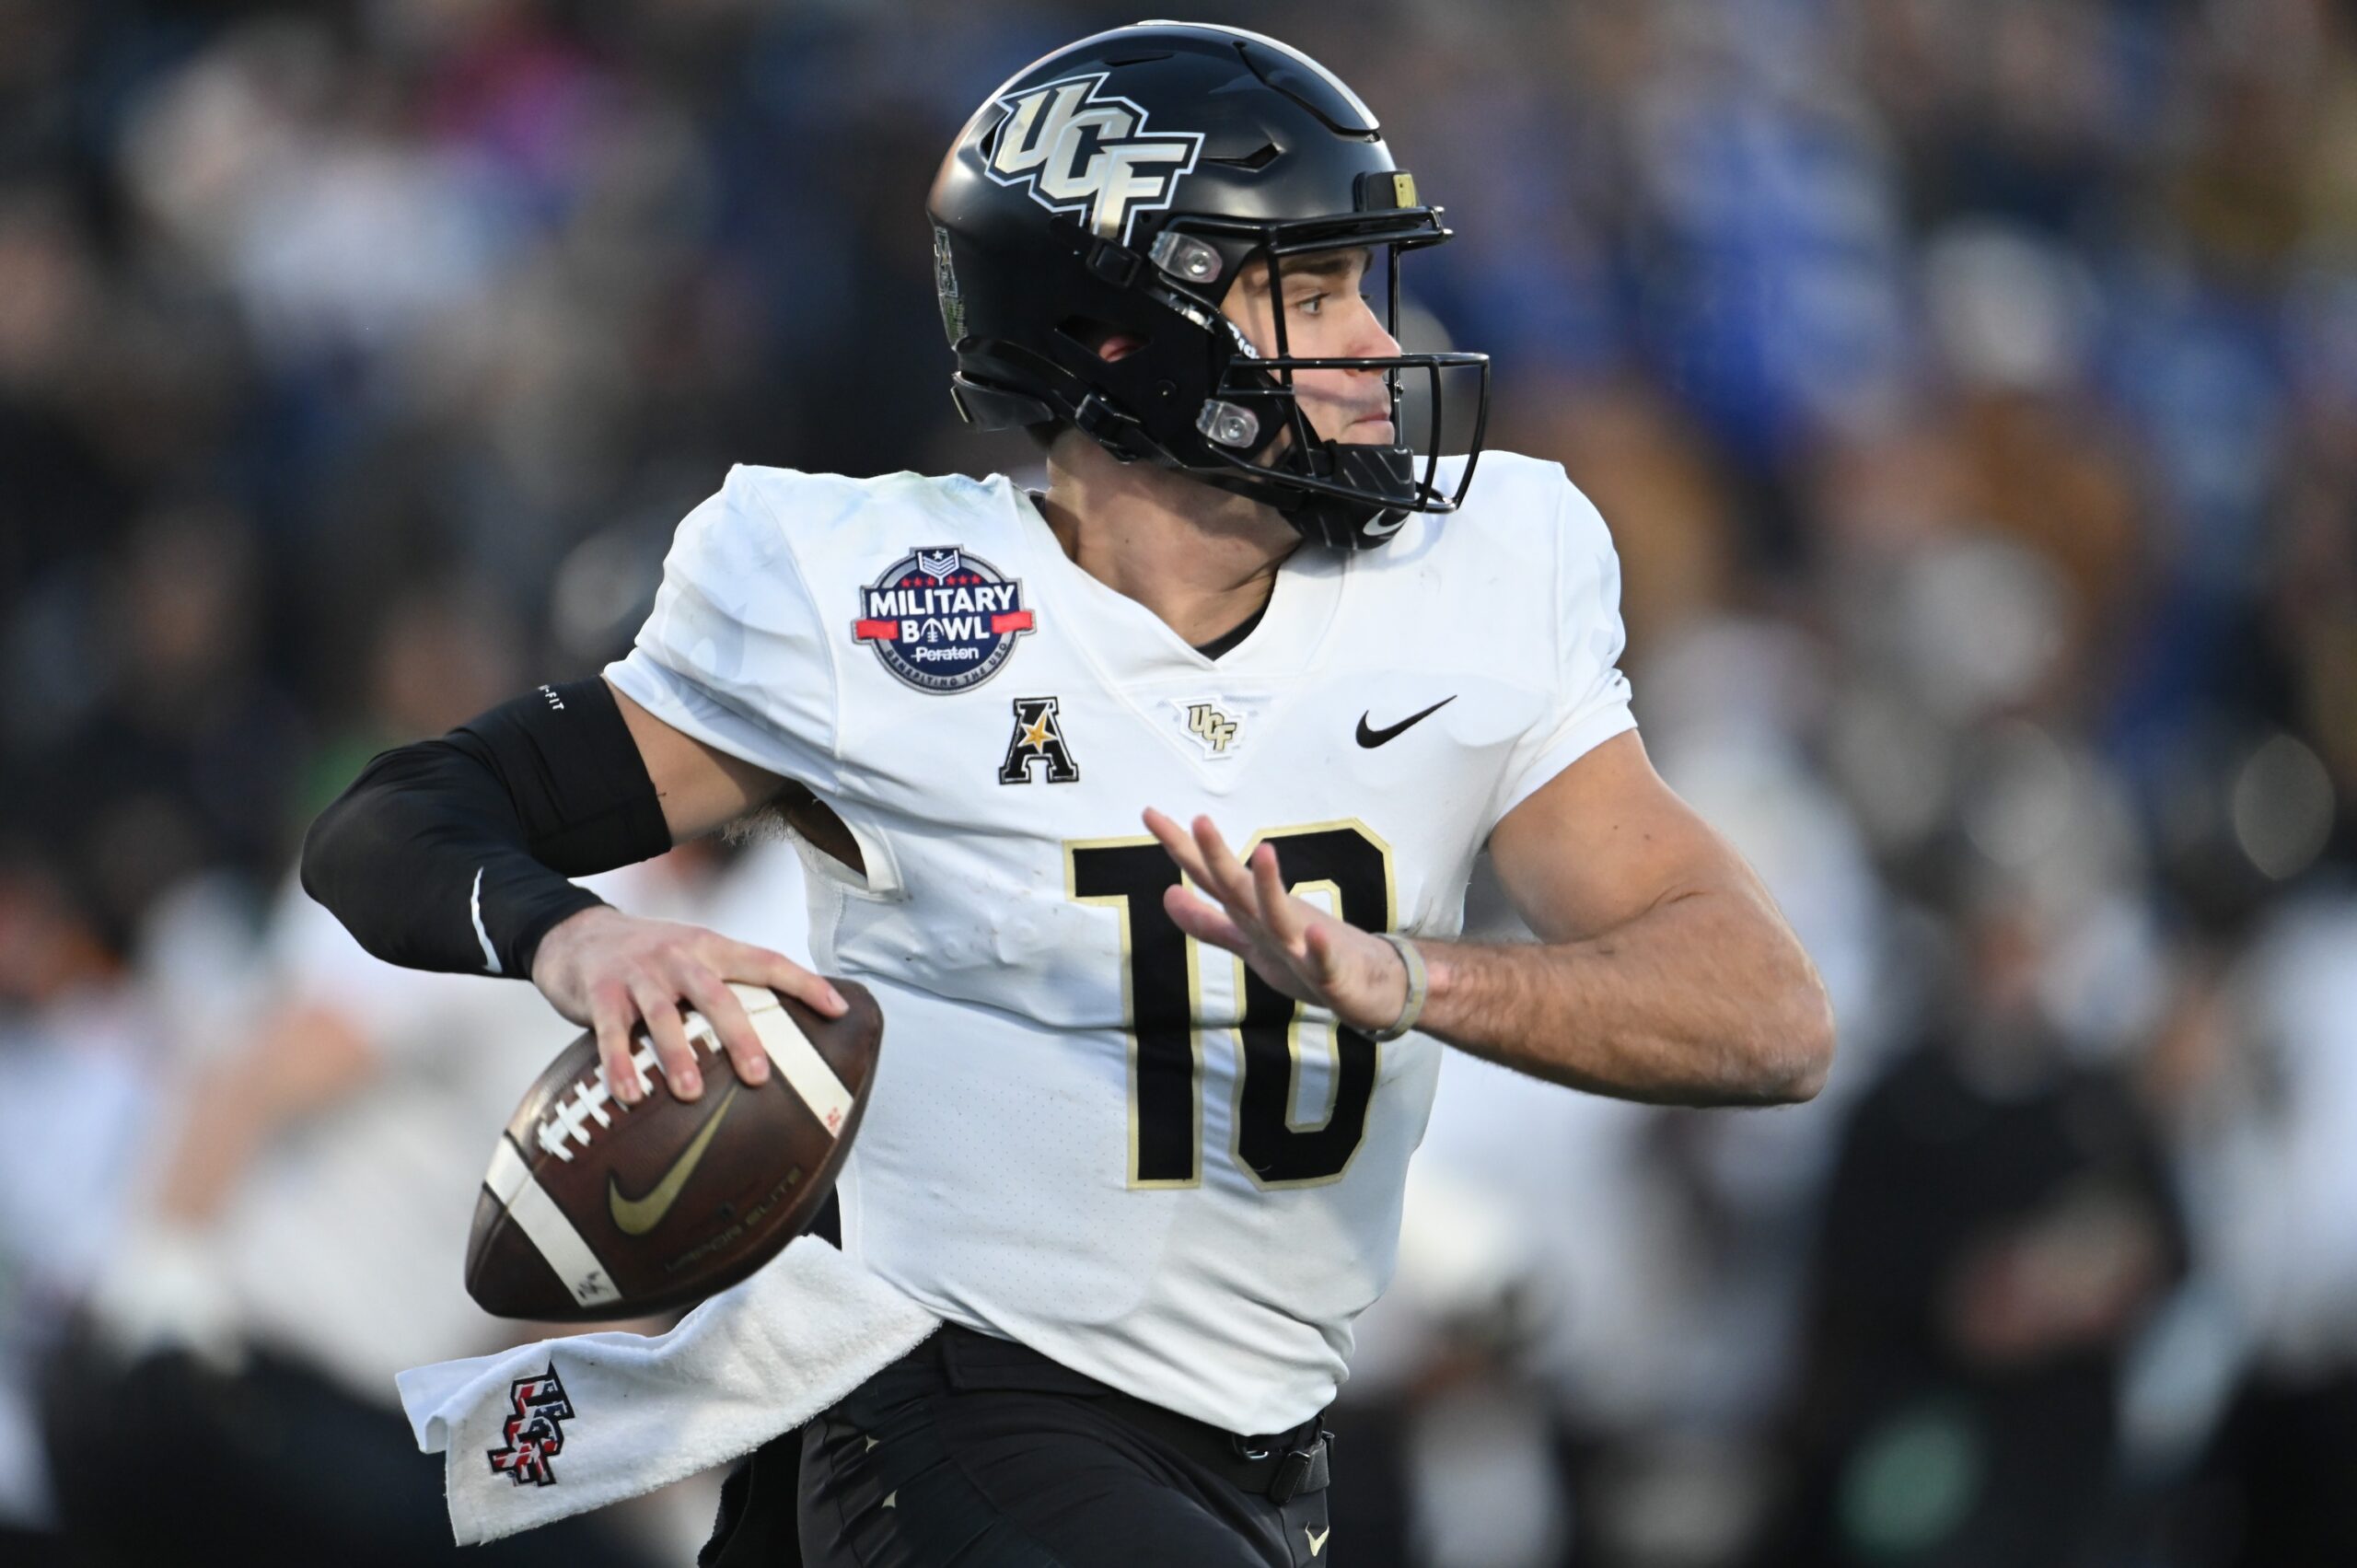 UCF Knights Preview Roster, Prospects, Schedule, and More